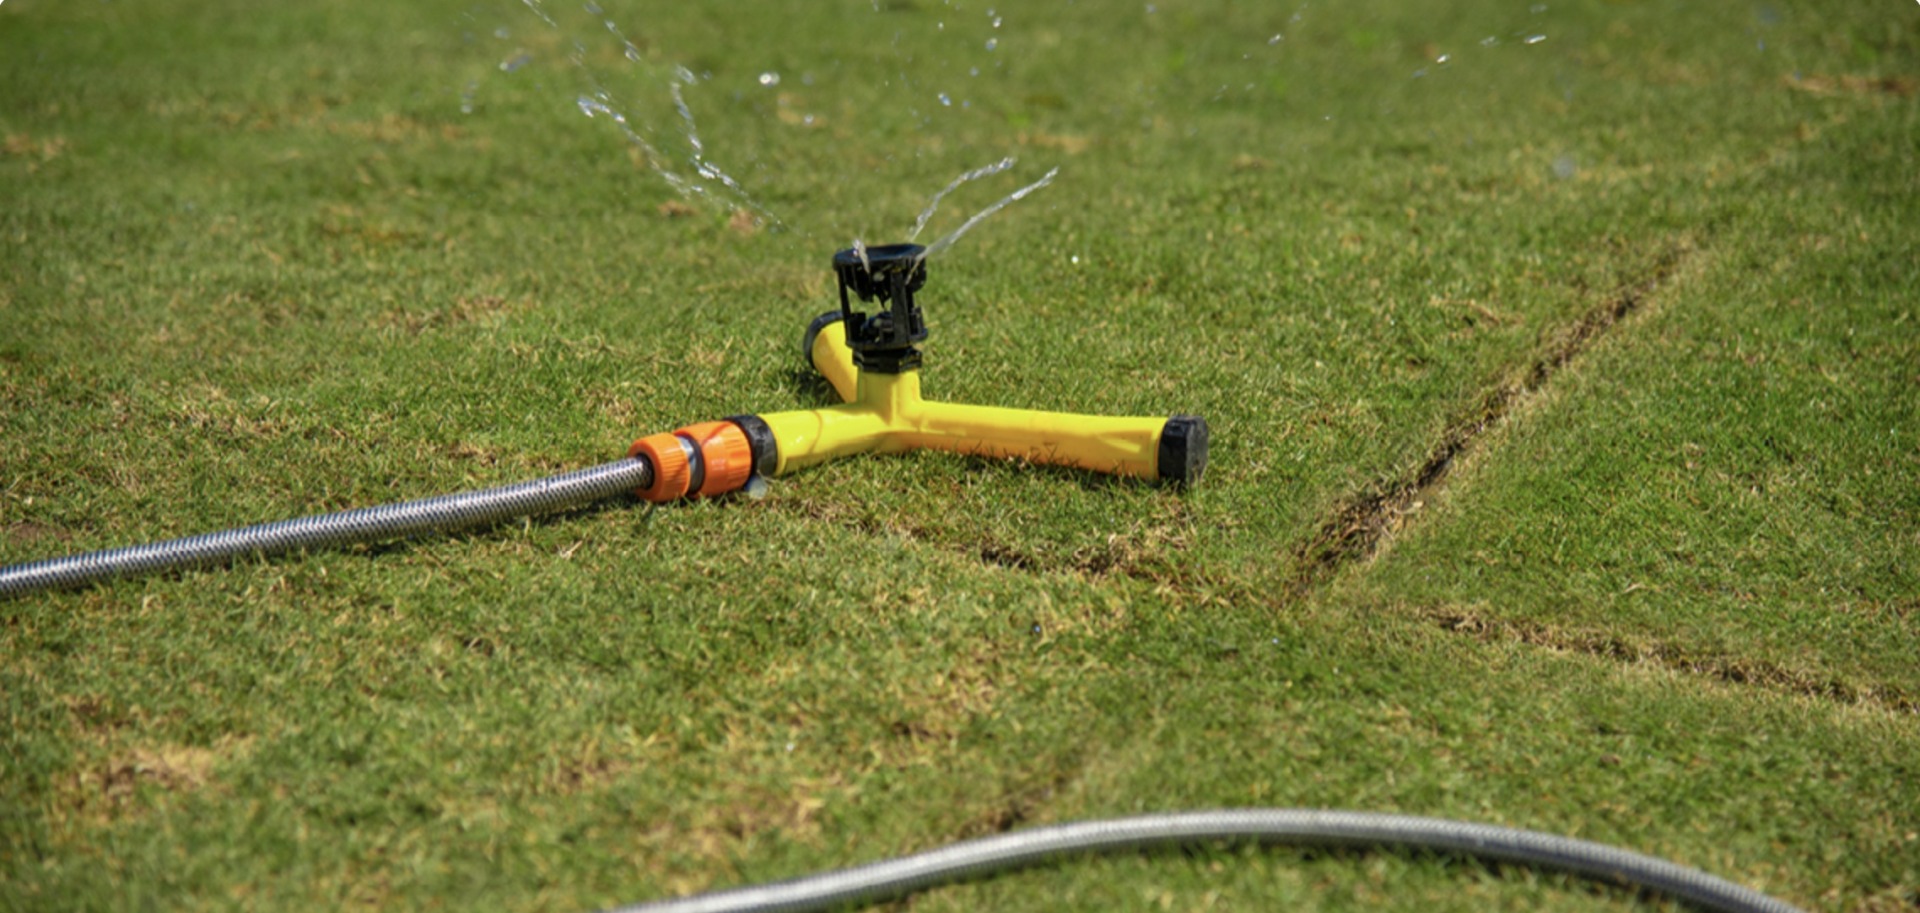 How to care for a new lawn